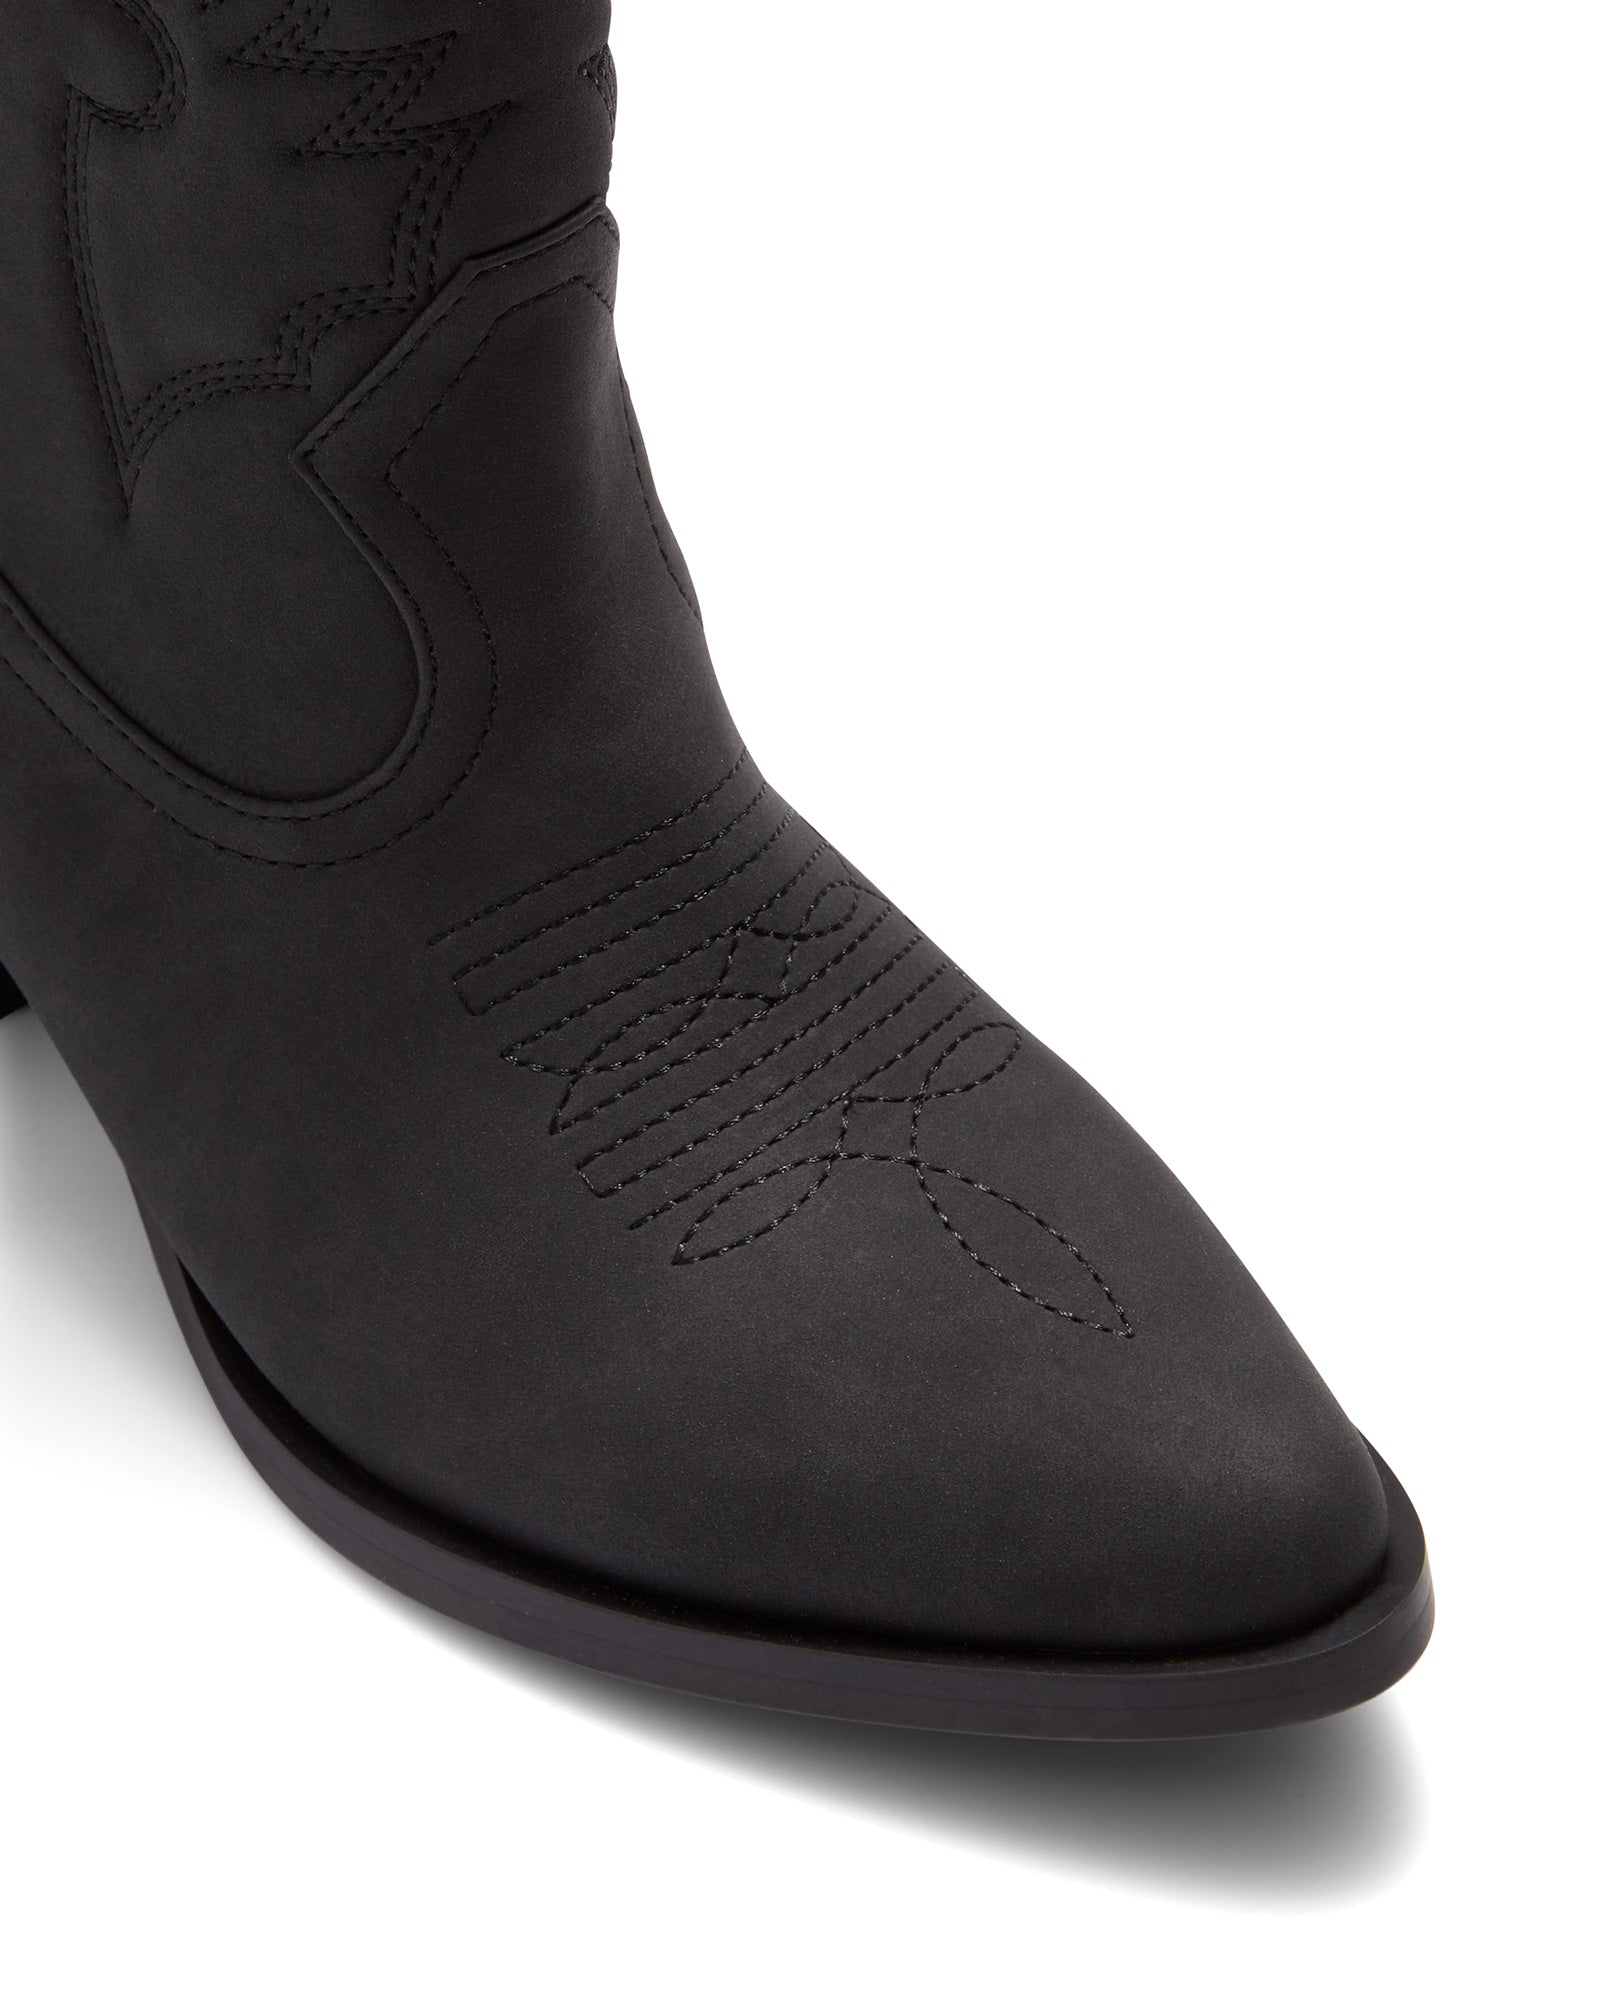 Therapy Shoes Rayne Black | Women's Boots | Western | Cowboy | Festival